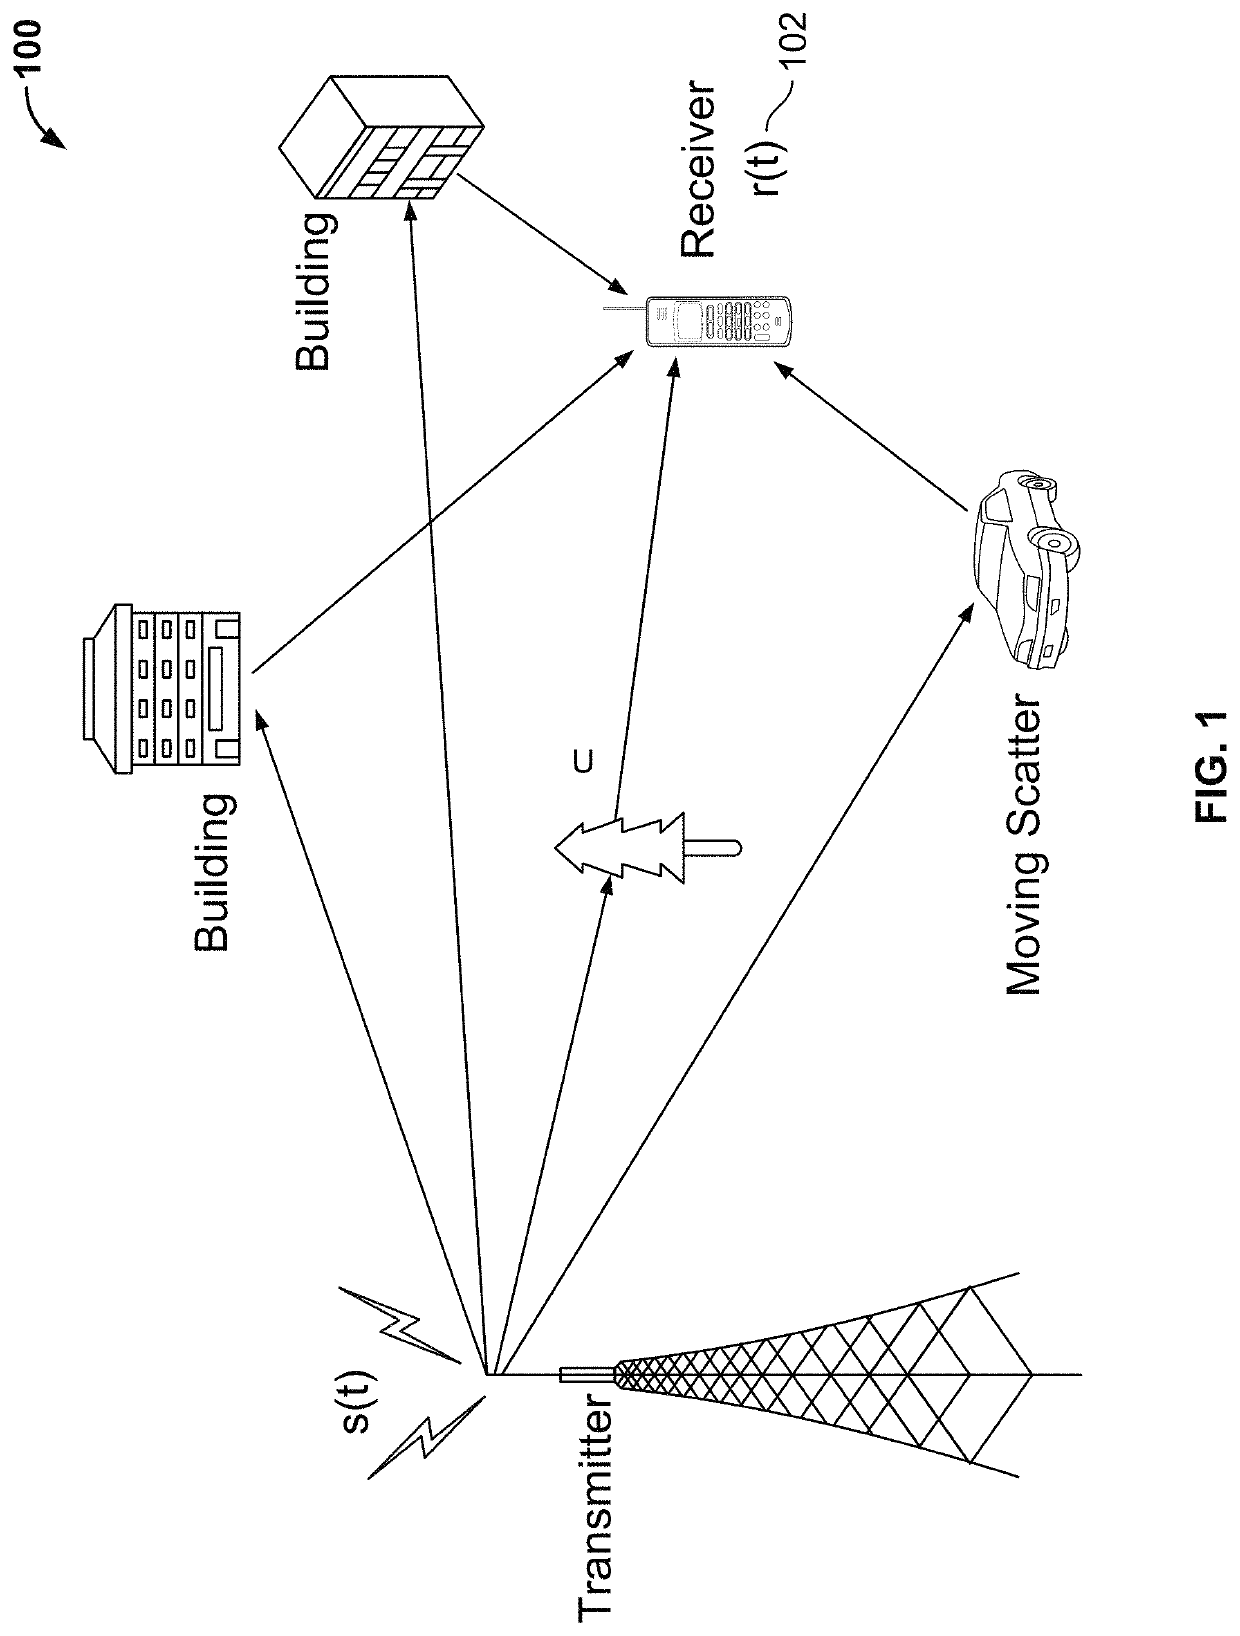 Channel acquistion using orthogonal time frequency space modulated pilot signal